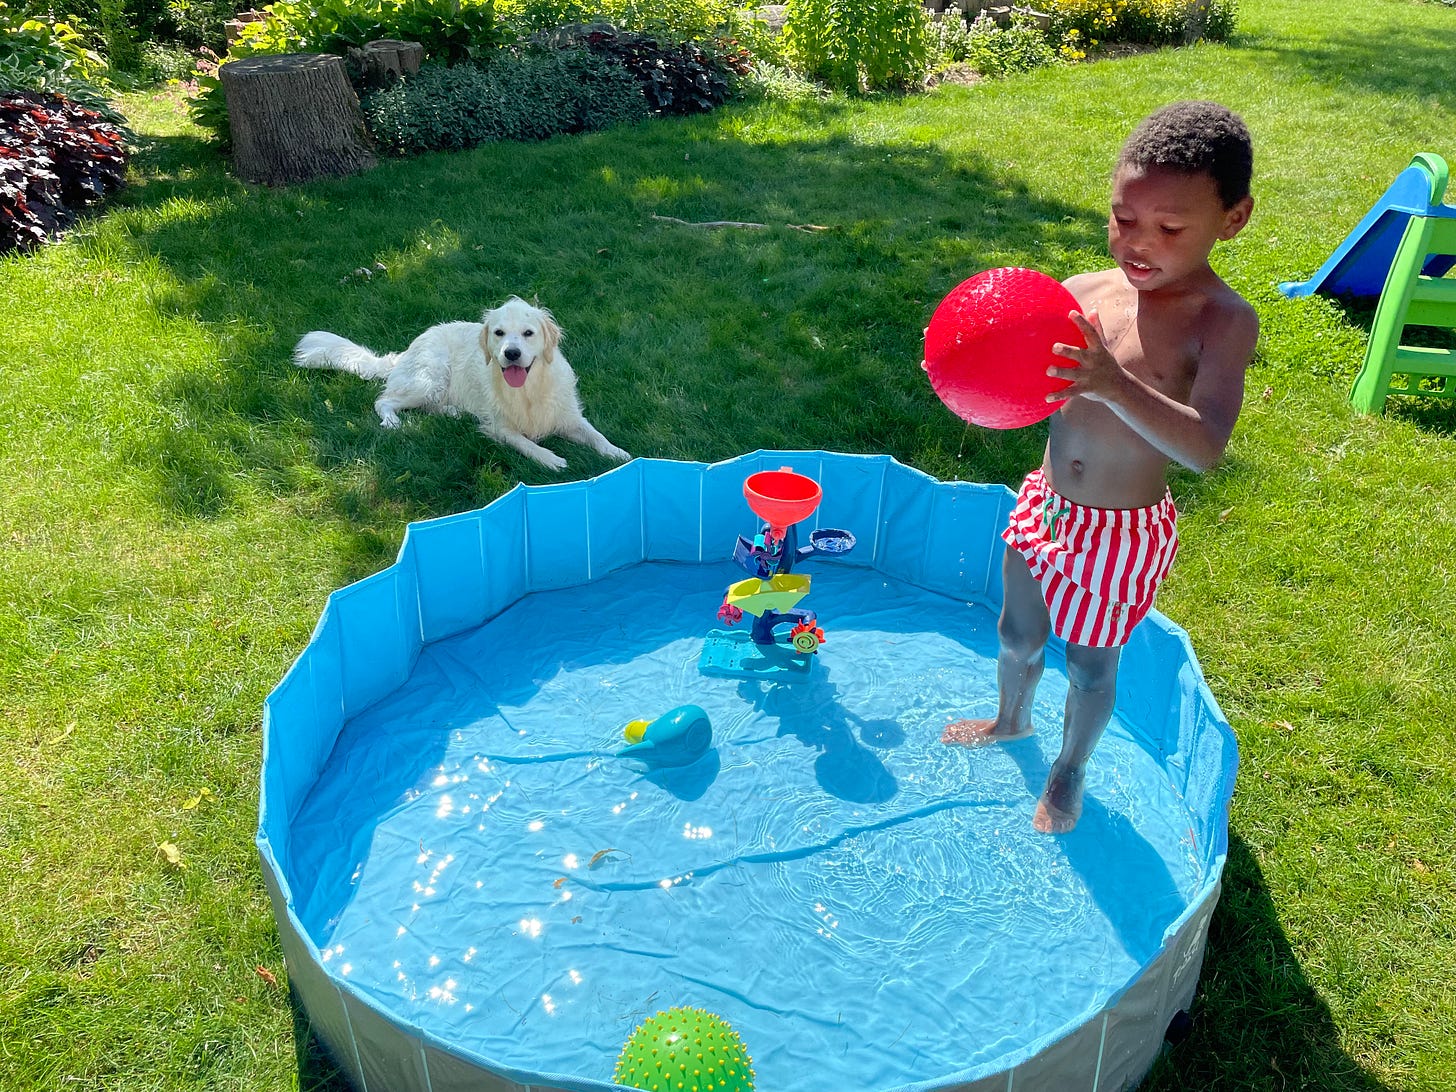 A Black 5-year old in red and white swim trunks stands in a shallow pool with a golden retriever nearby in the shade